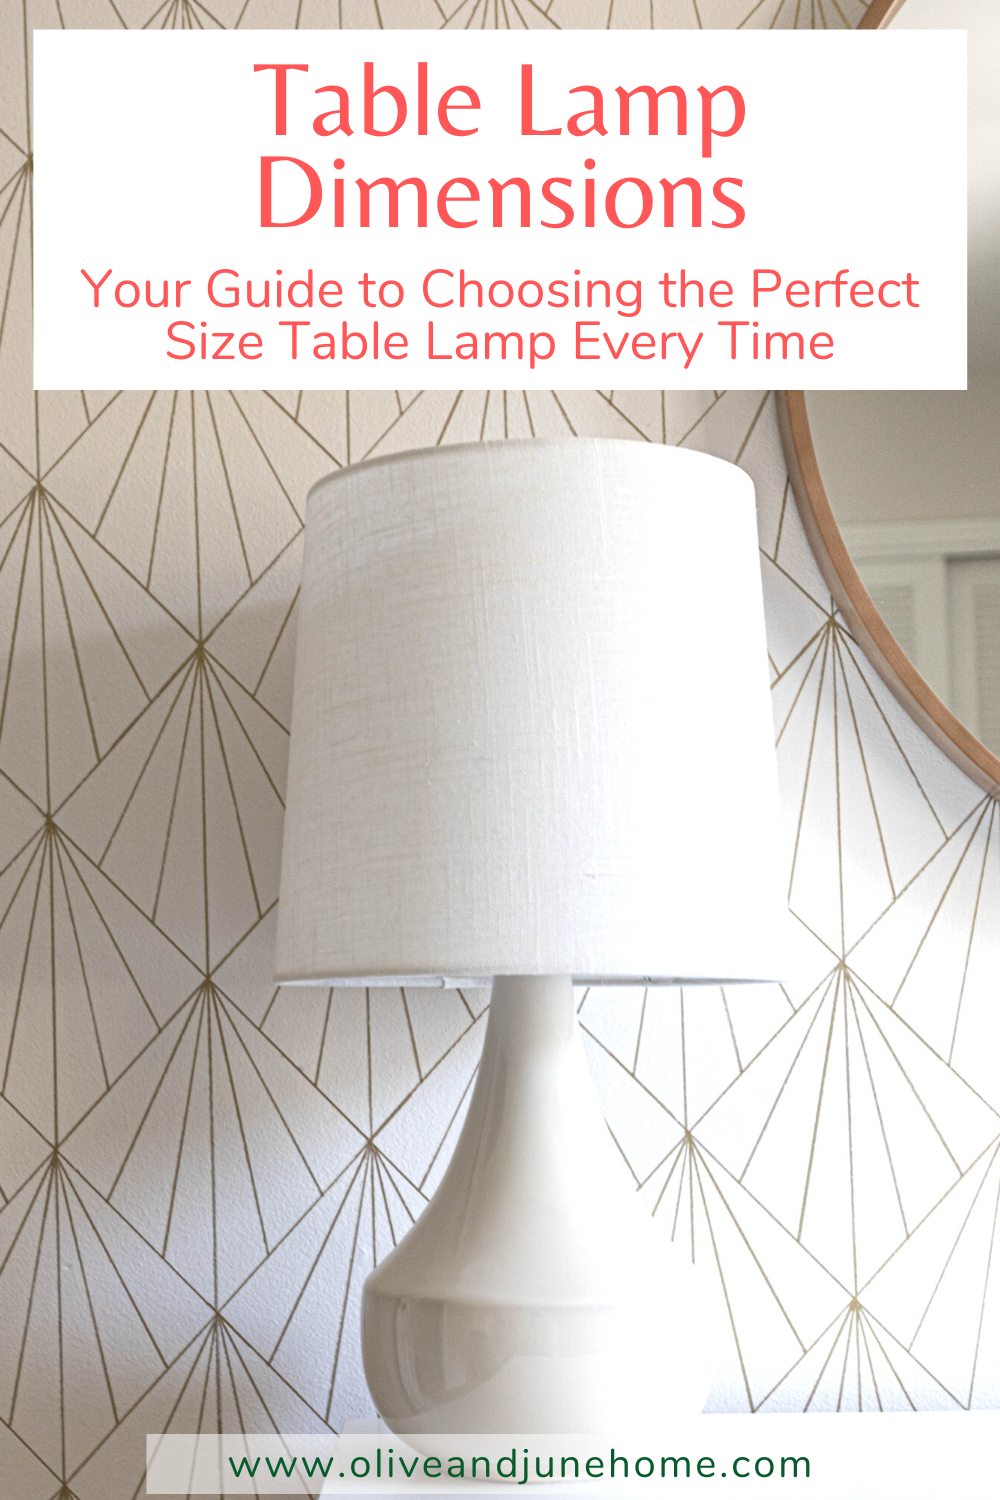 How To Pick The Right Size Lamp Every, How Tall Should Side Table Lamps Be